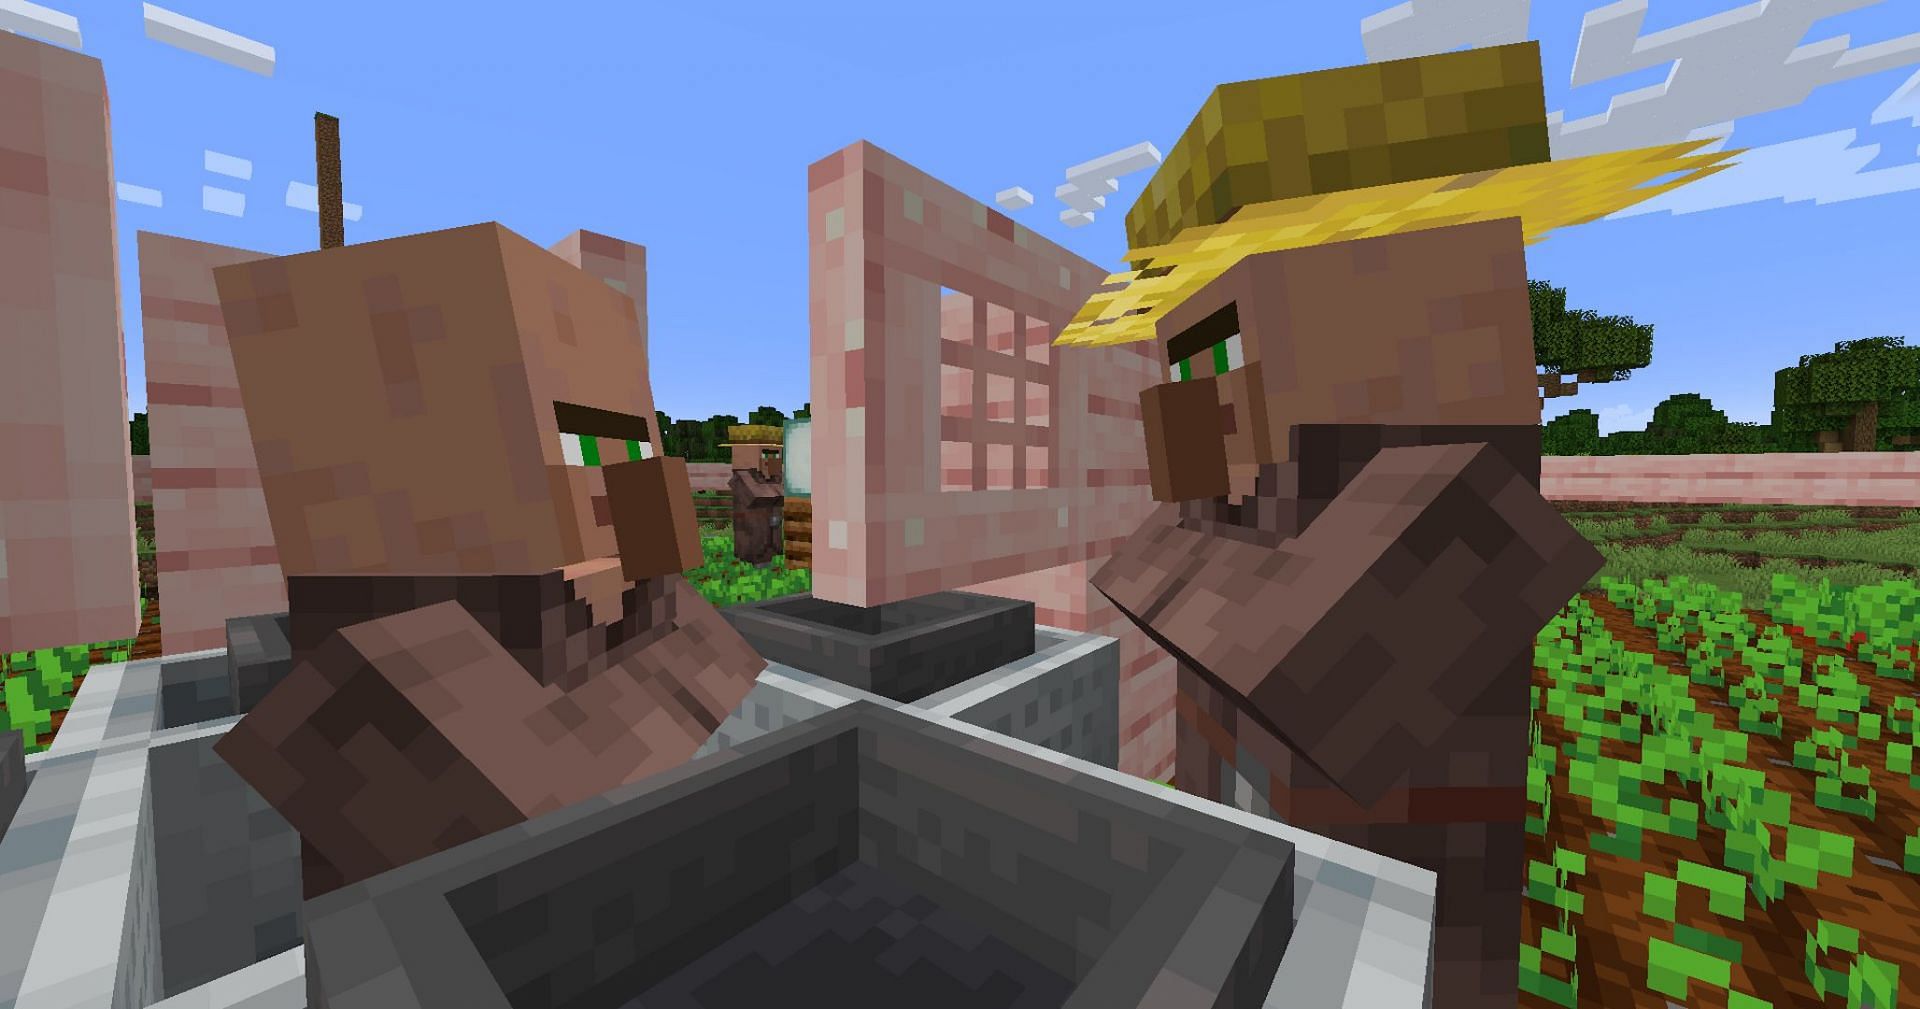 This farm utilizes villager interactions to produce food (Image via Mojang)